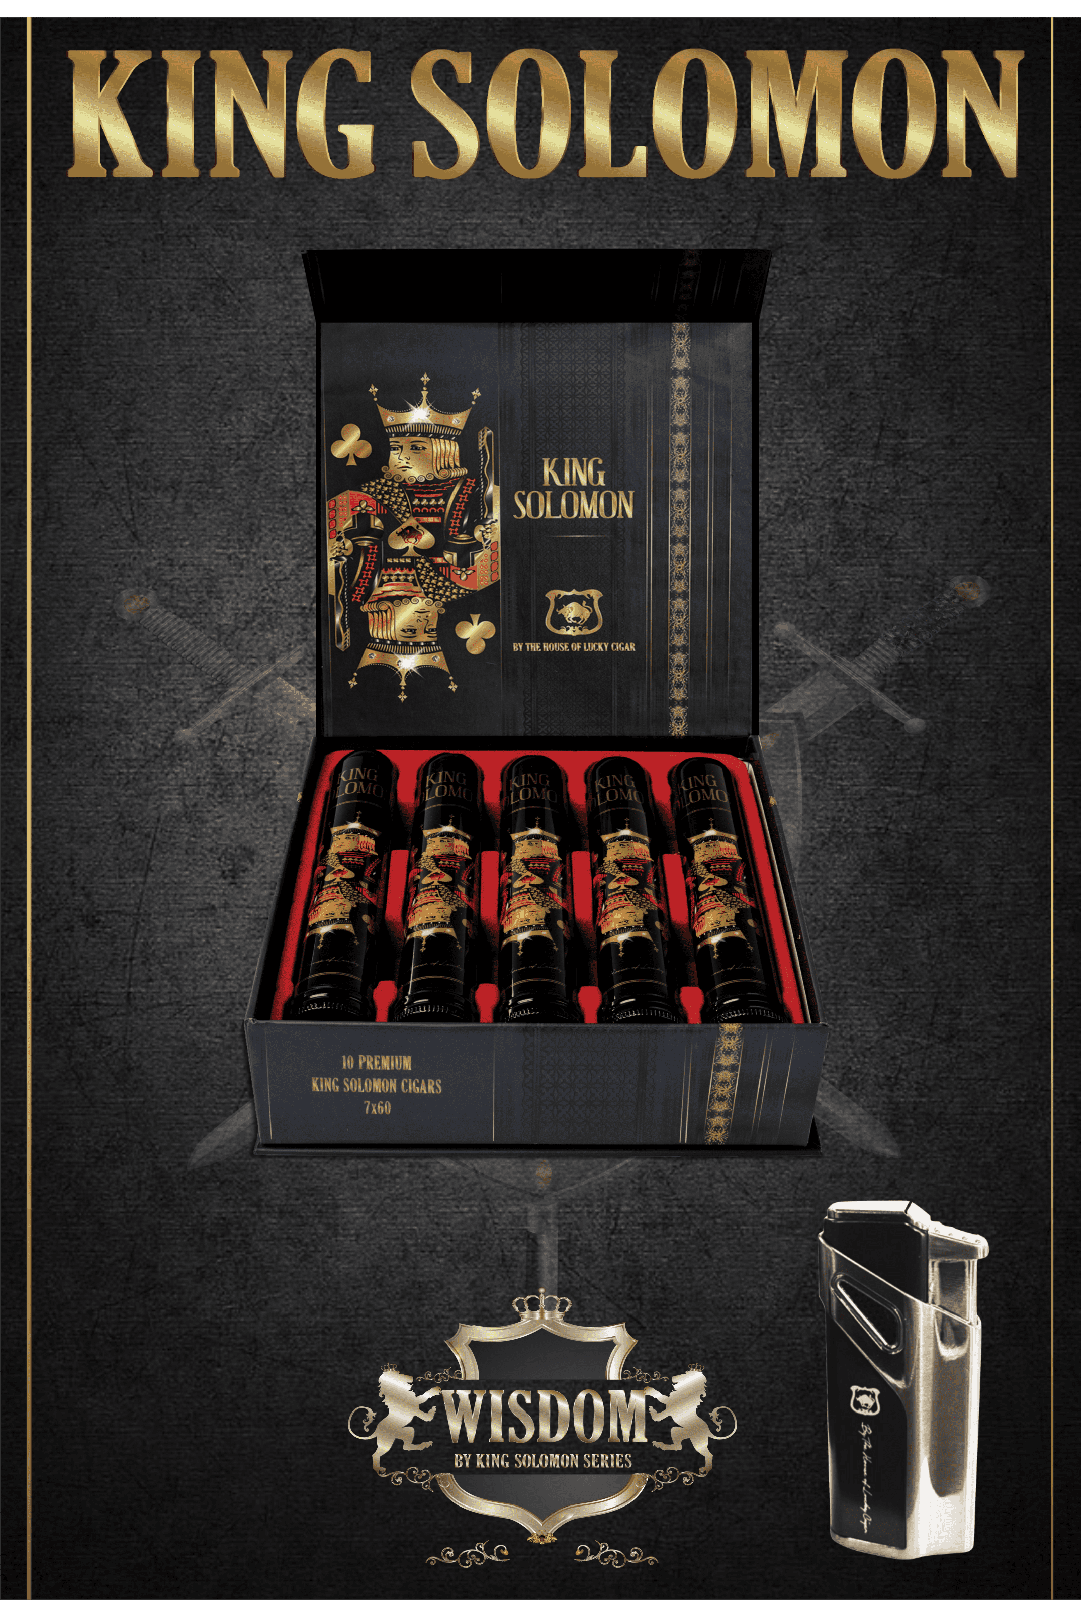 From The King Solomon Series: Box of 10 Solomon 7x60 Cigars with Torch Set